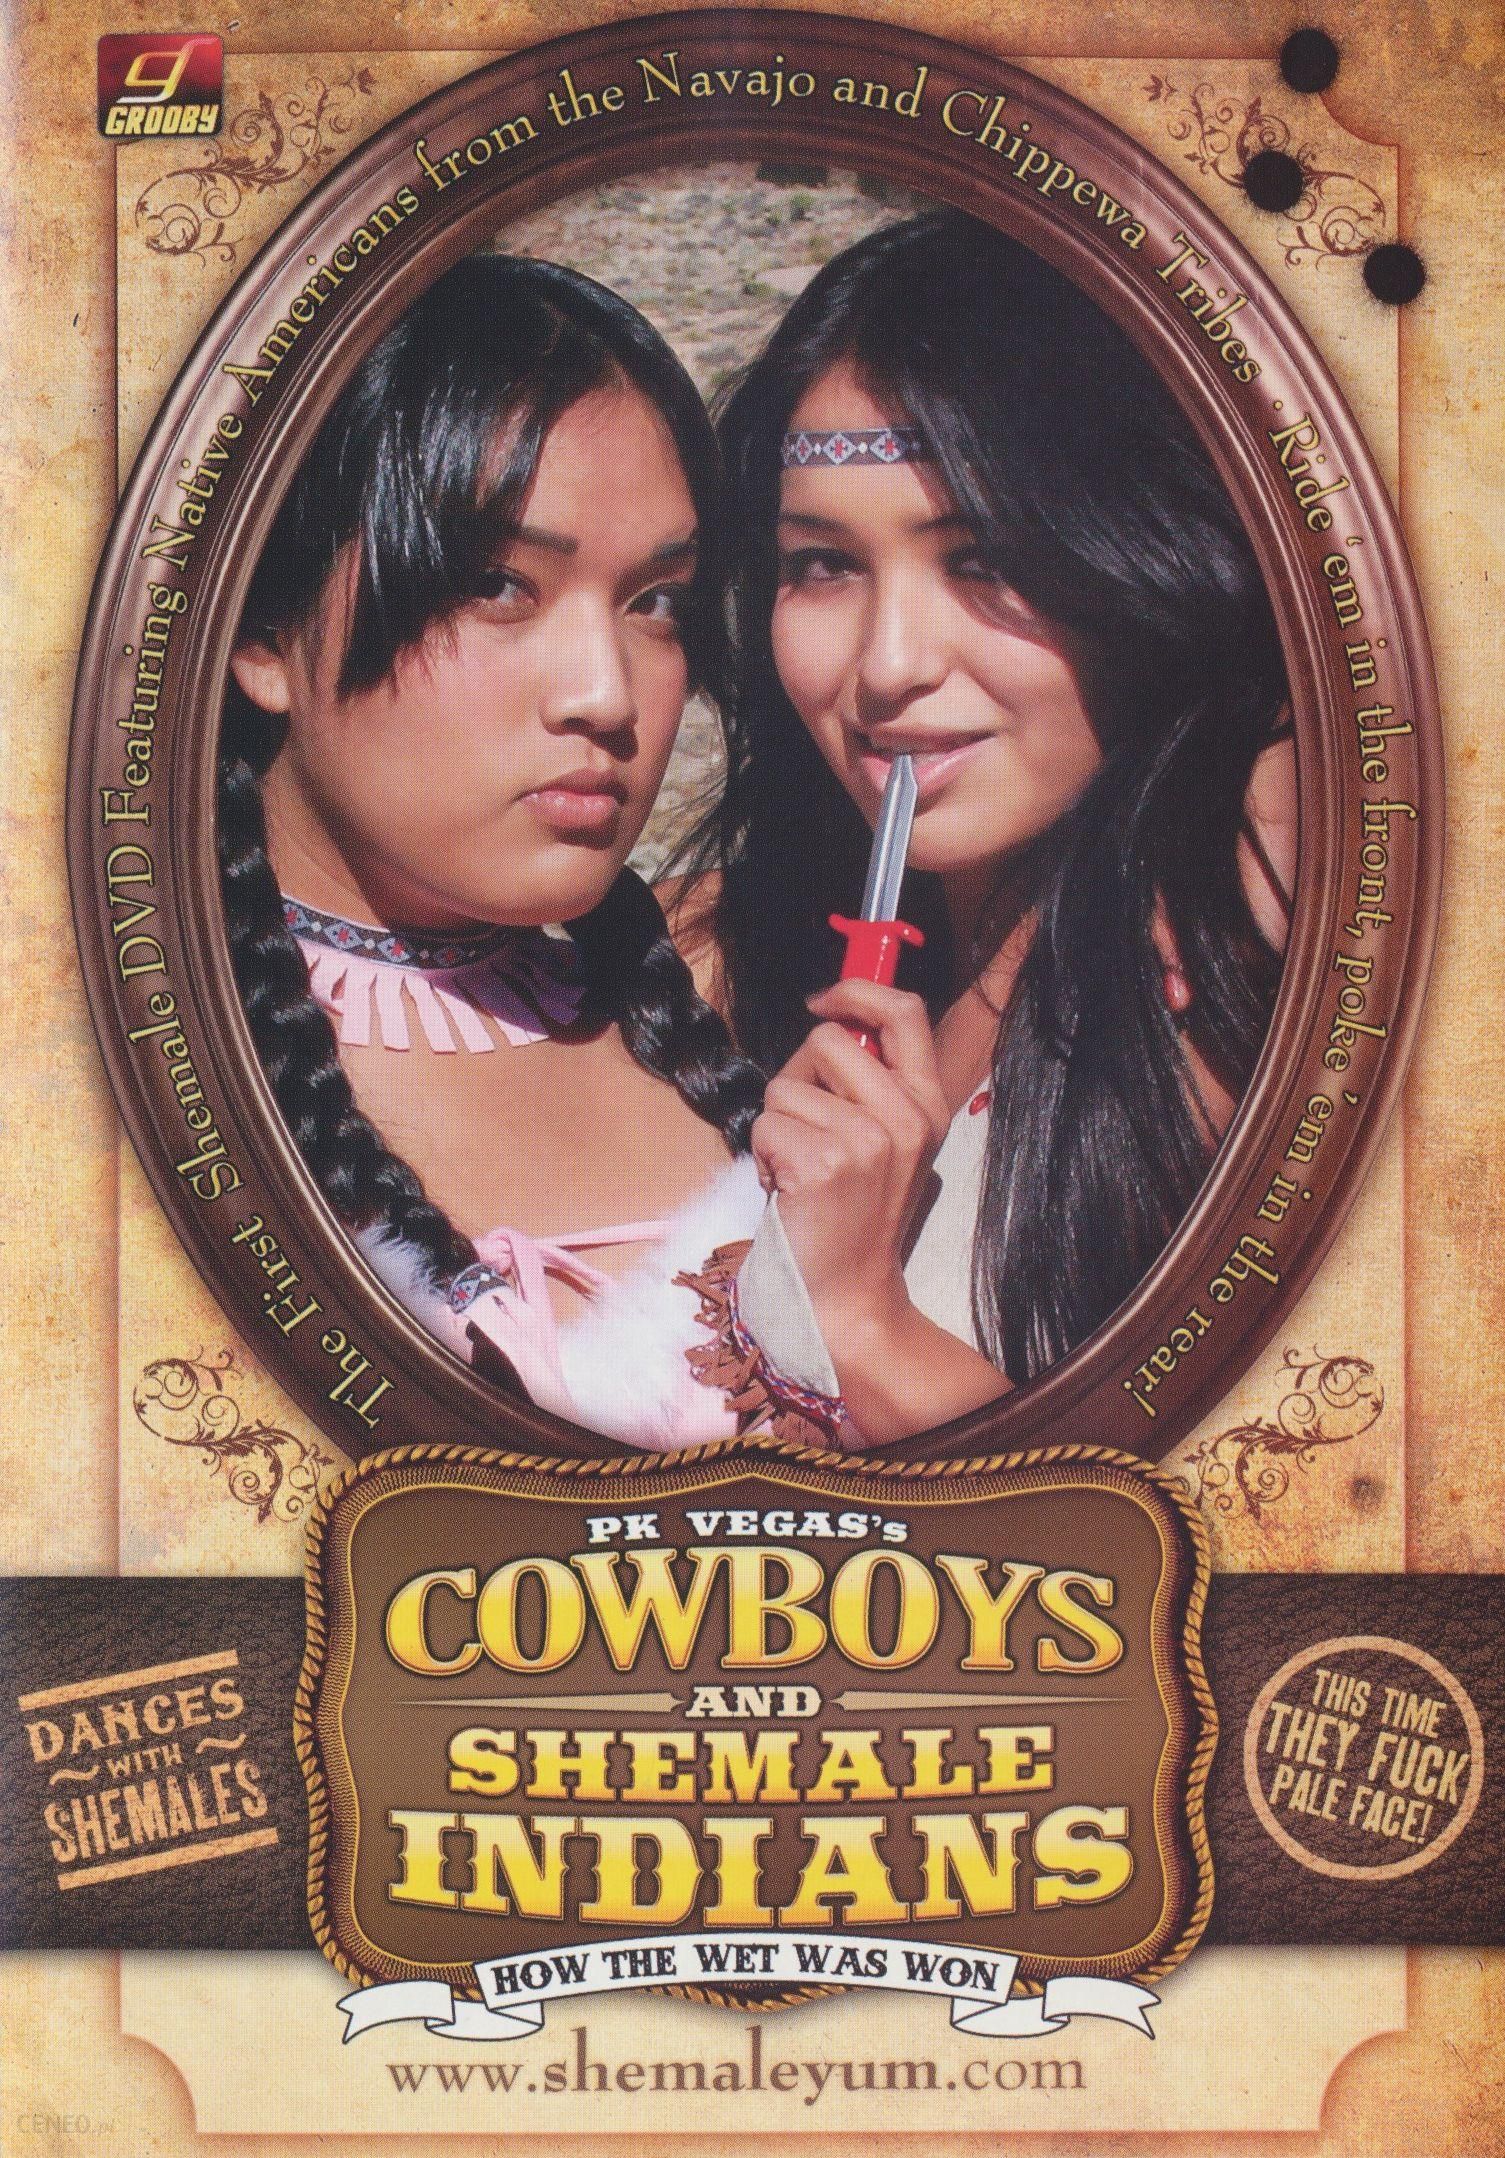 Cowboys and shemale indians